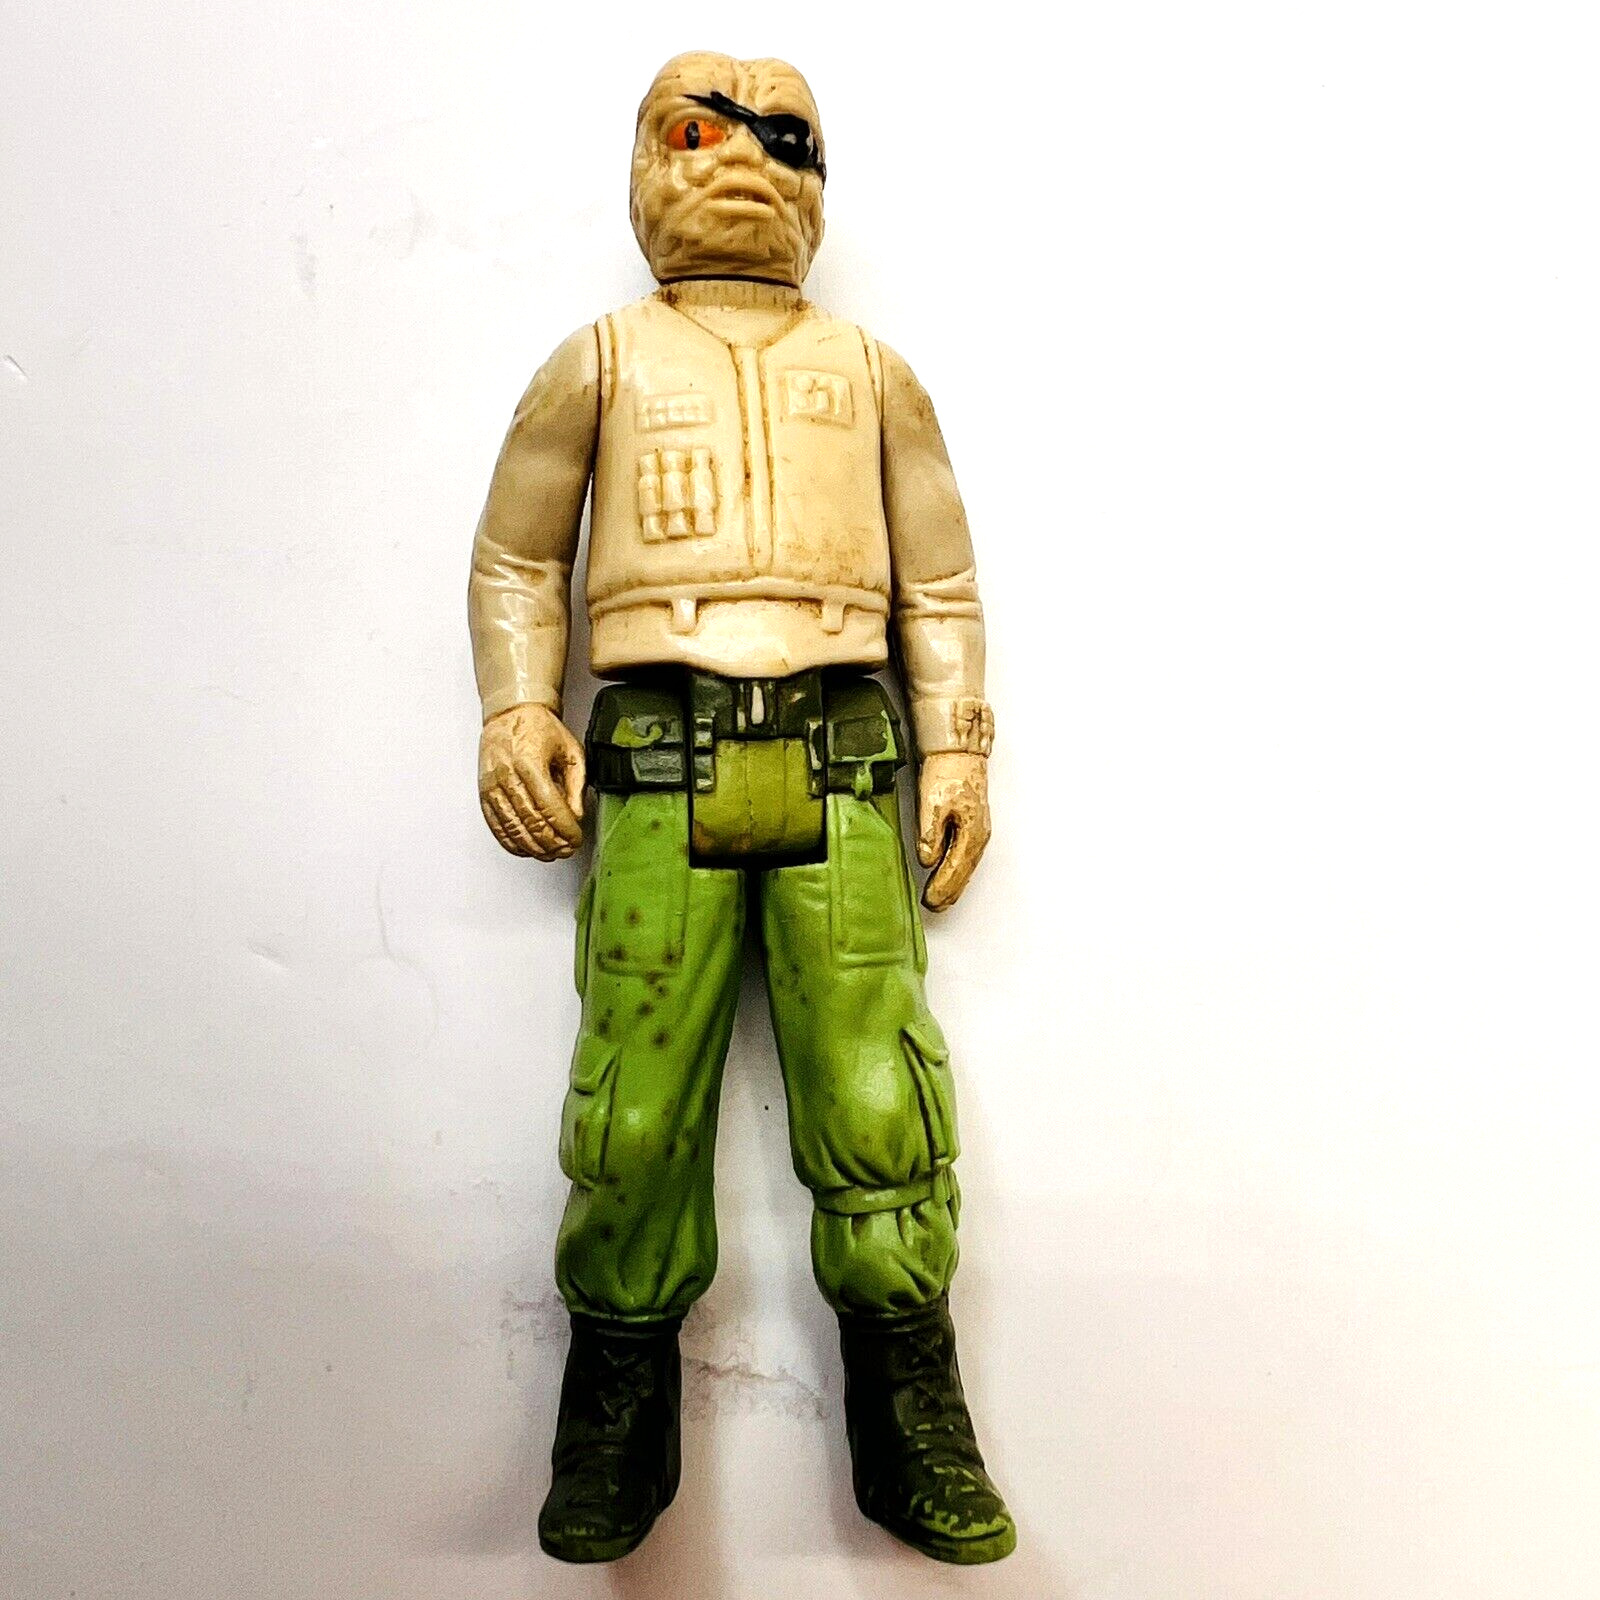 Star Wars SW 1984 vtg Prune Face Kenner Action Figure loose collect toy pics